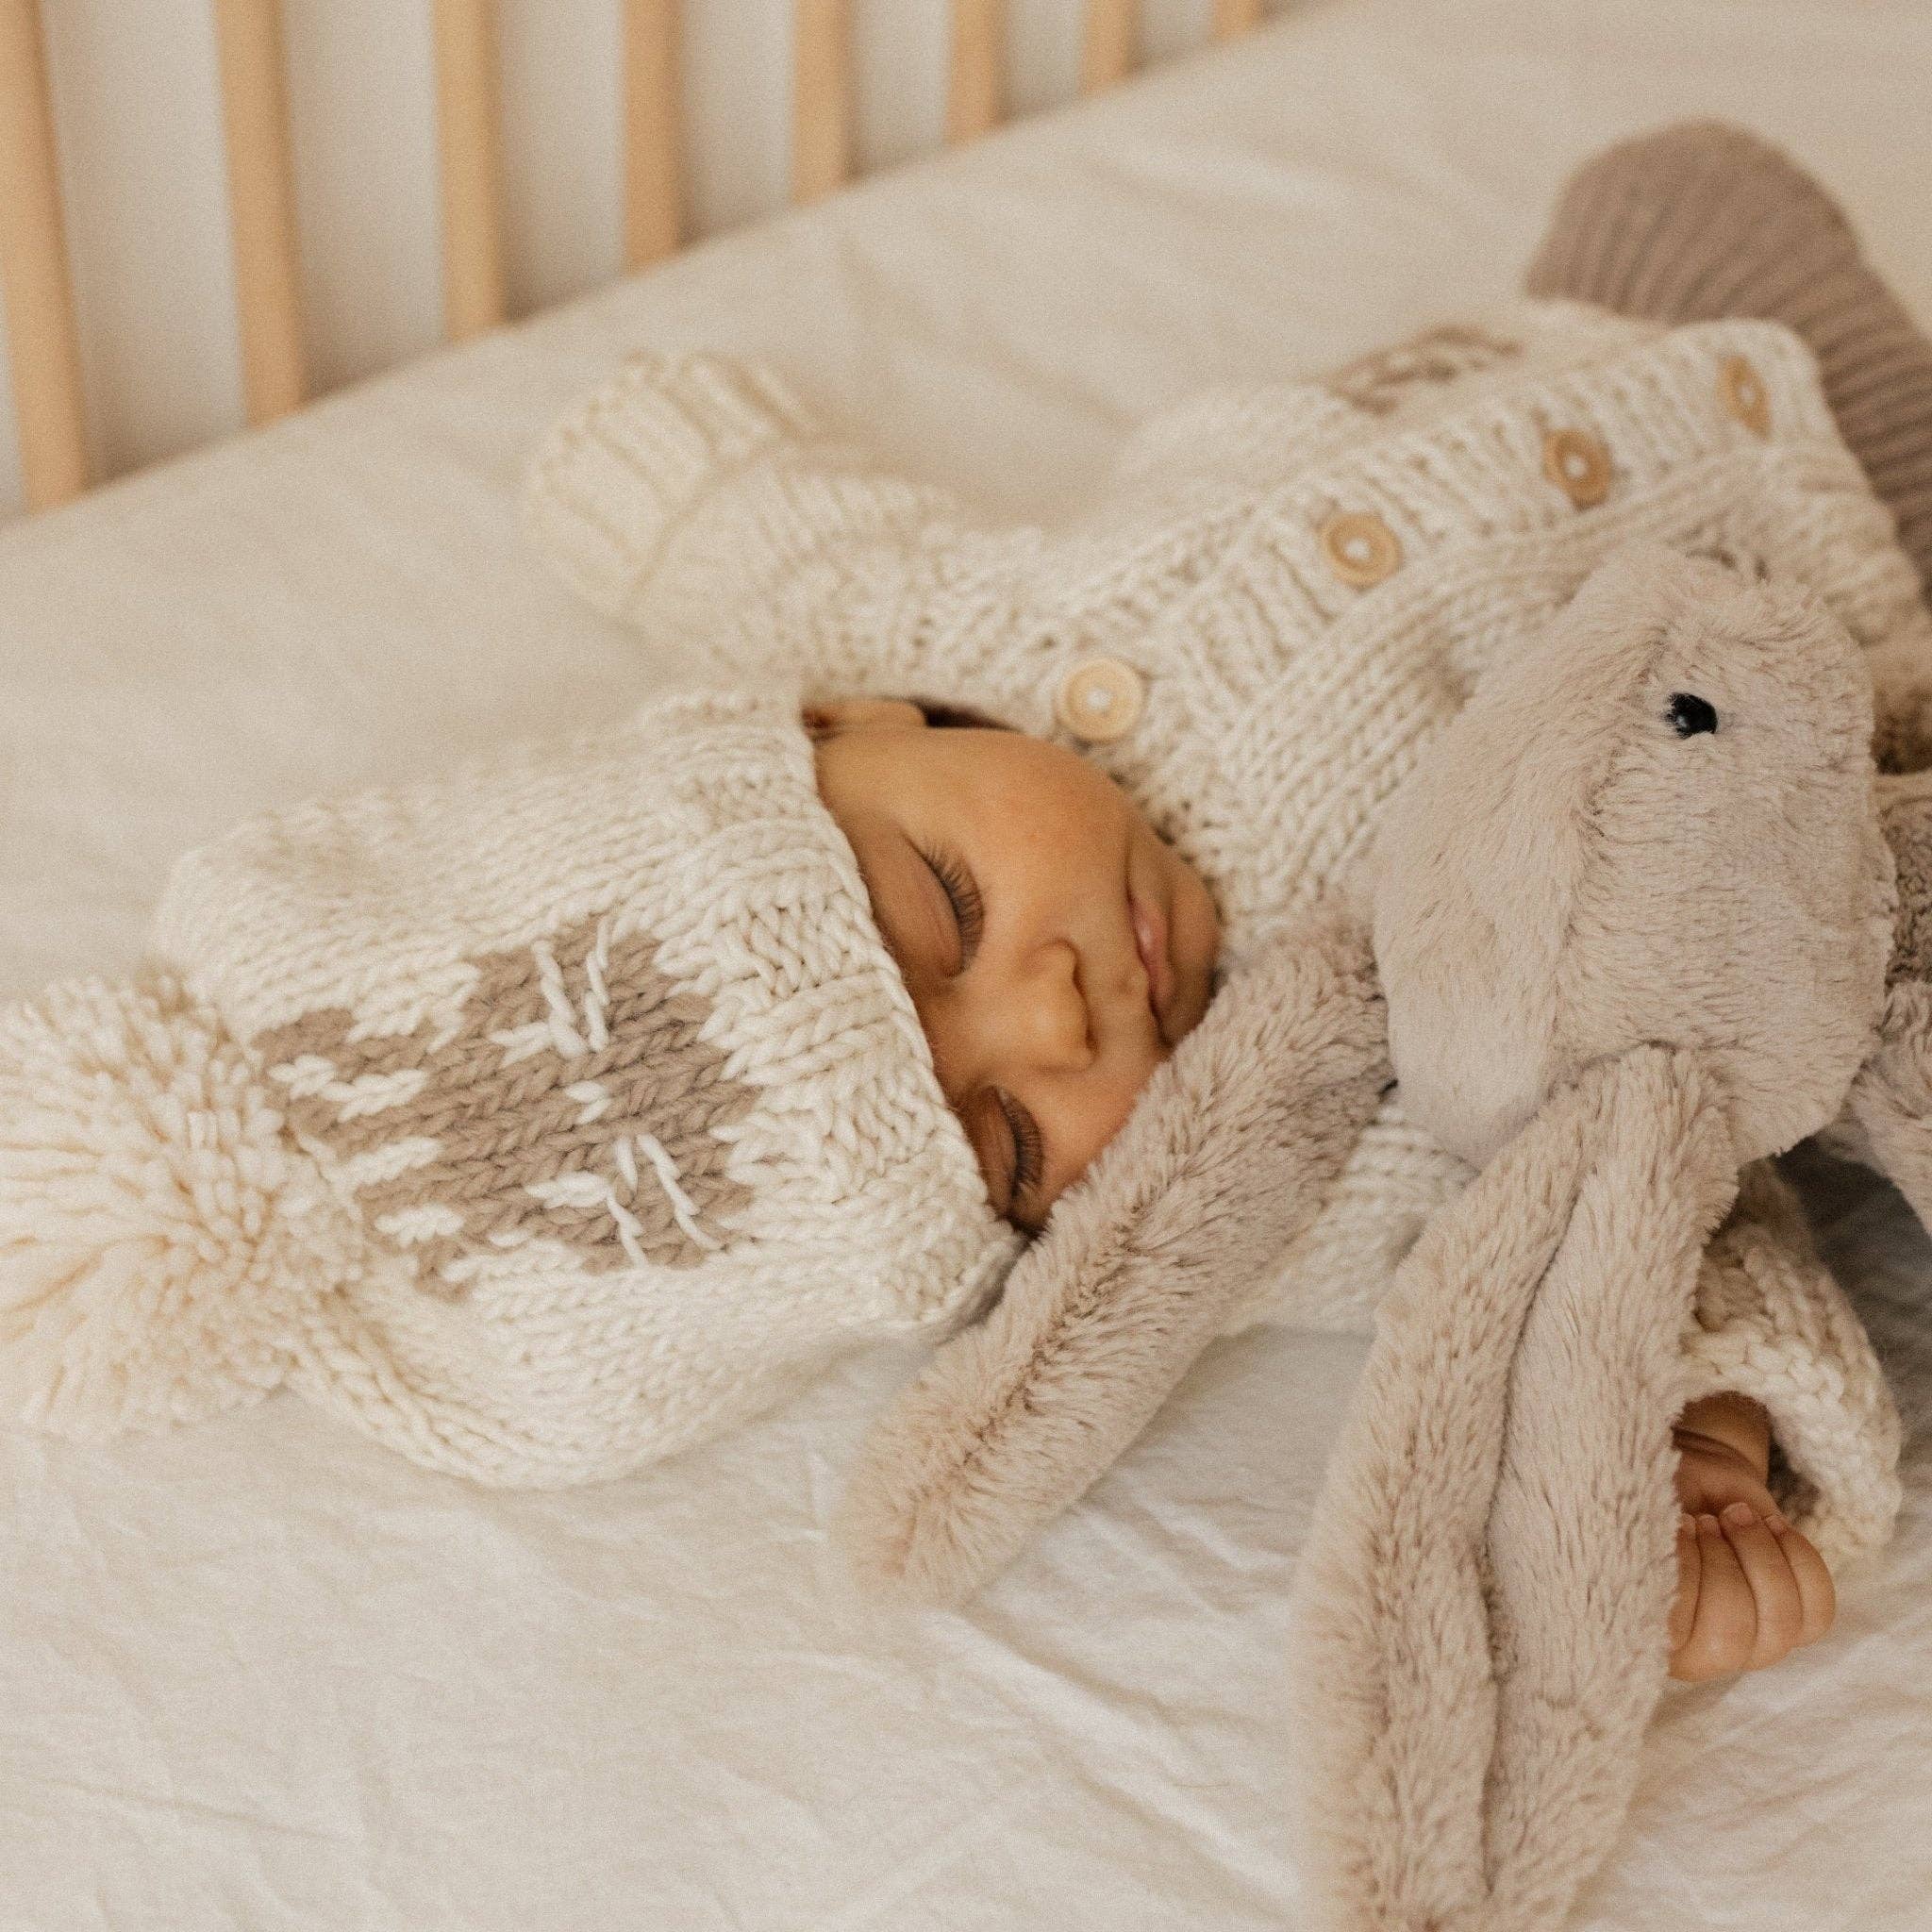 Huggalugs - Whiskers Bunny Rabbit Hand Knit Beanie Hat due Late Jan: S (0-6 months)